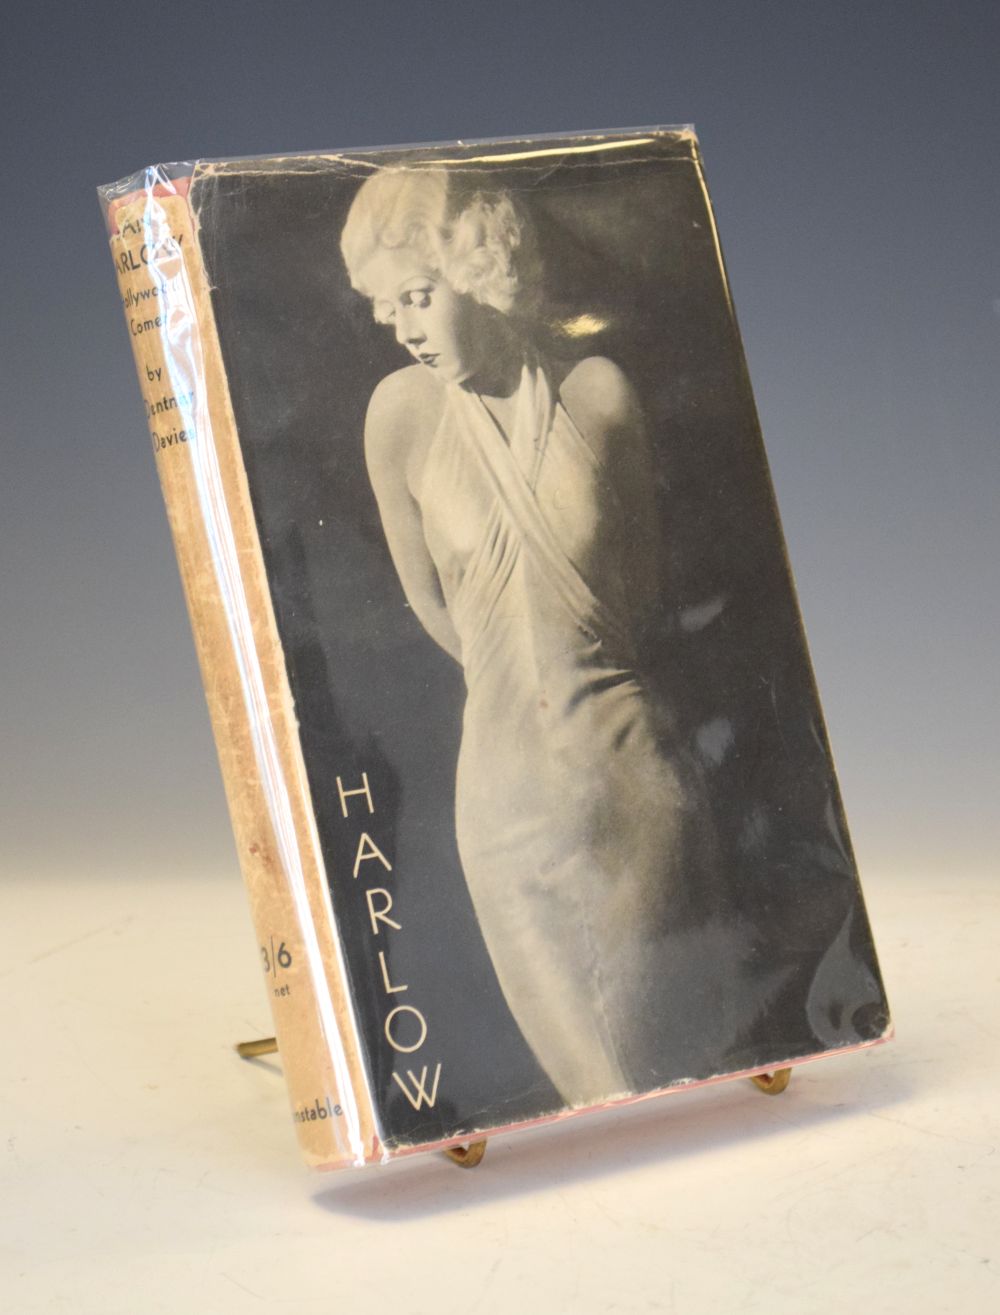 Books - Dentner Davies - Jean Harlow, Hollywood Comet, 1937 Condition: Tears, stains and creases